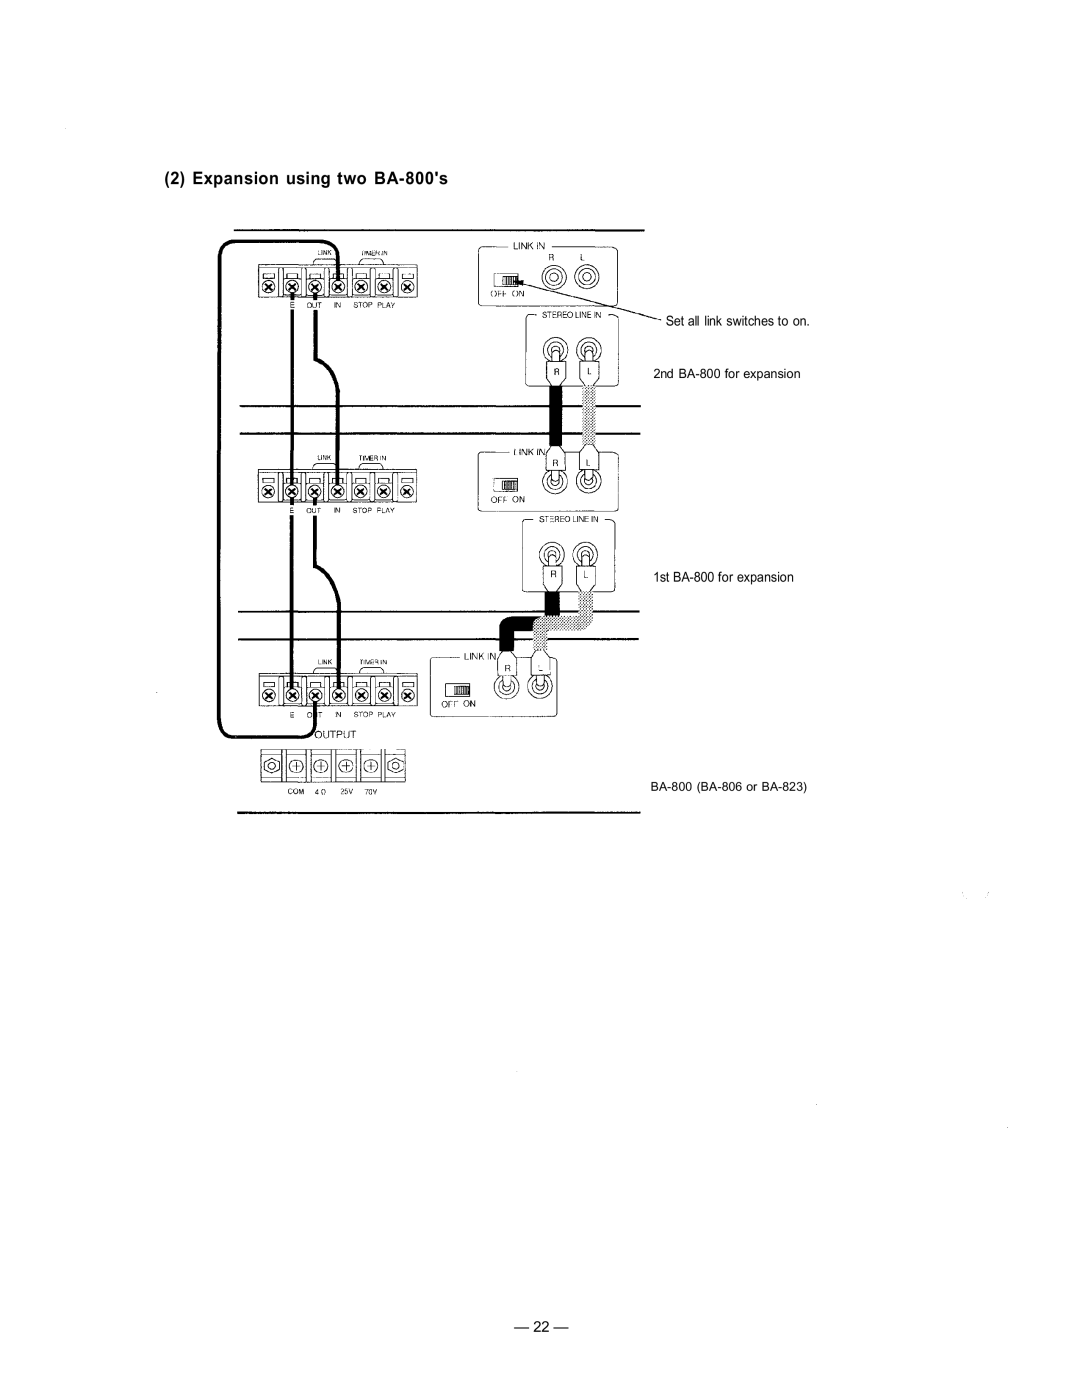 TOA Electronics manual Expansion using two BA-800s 